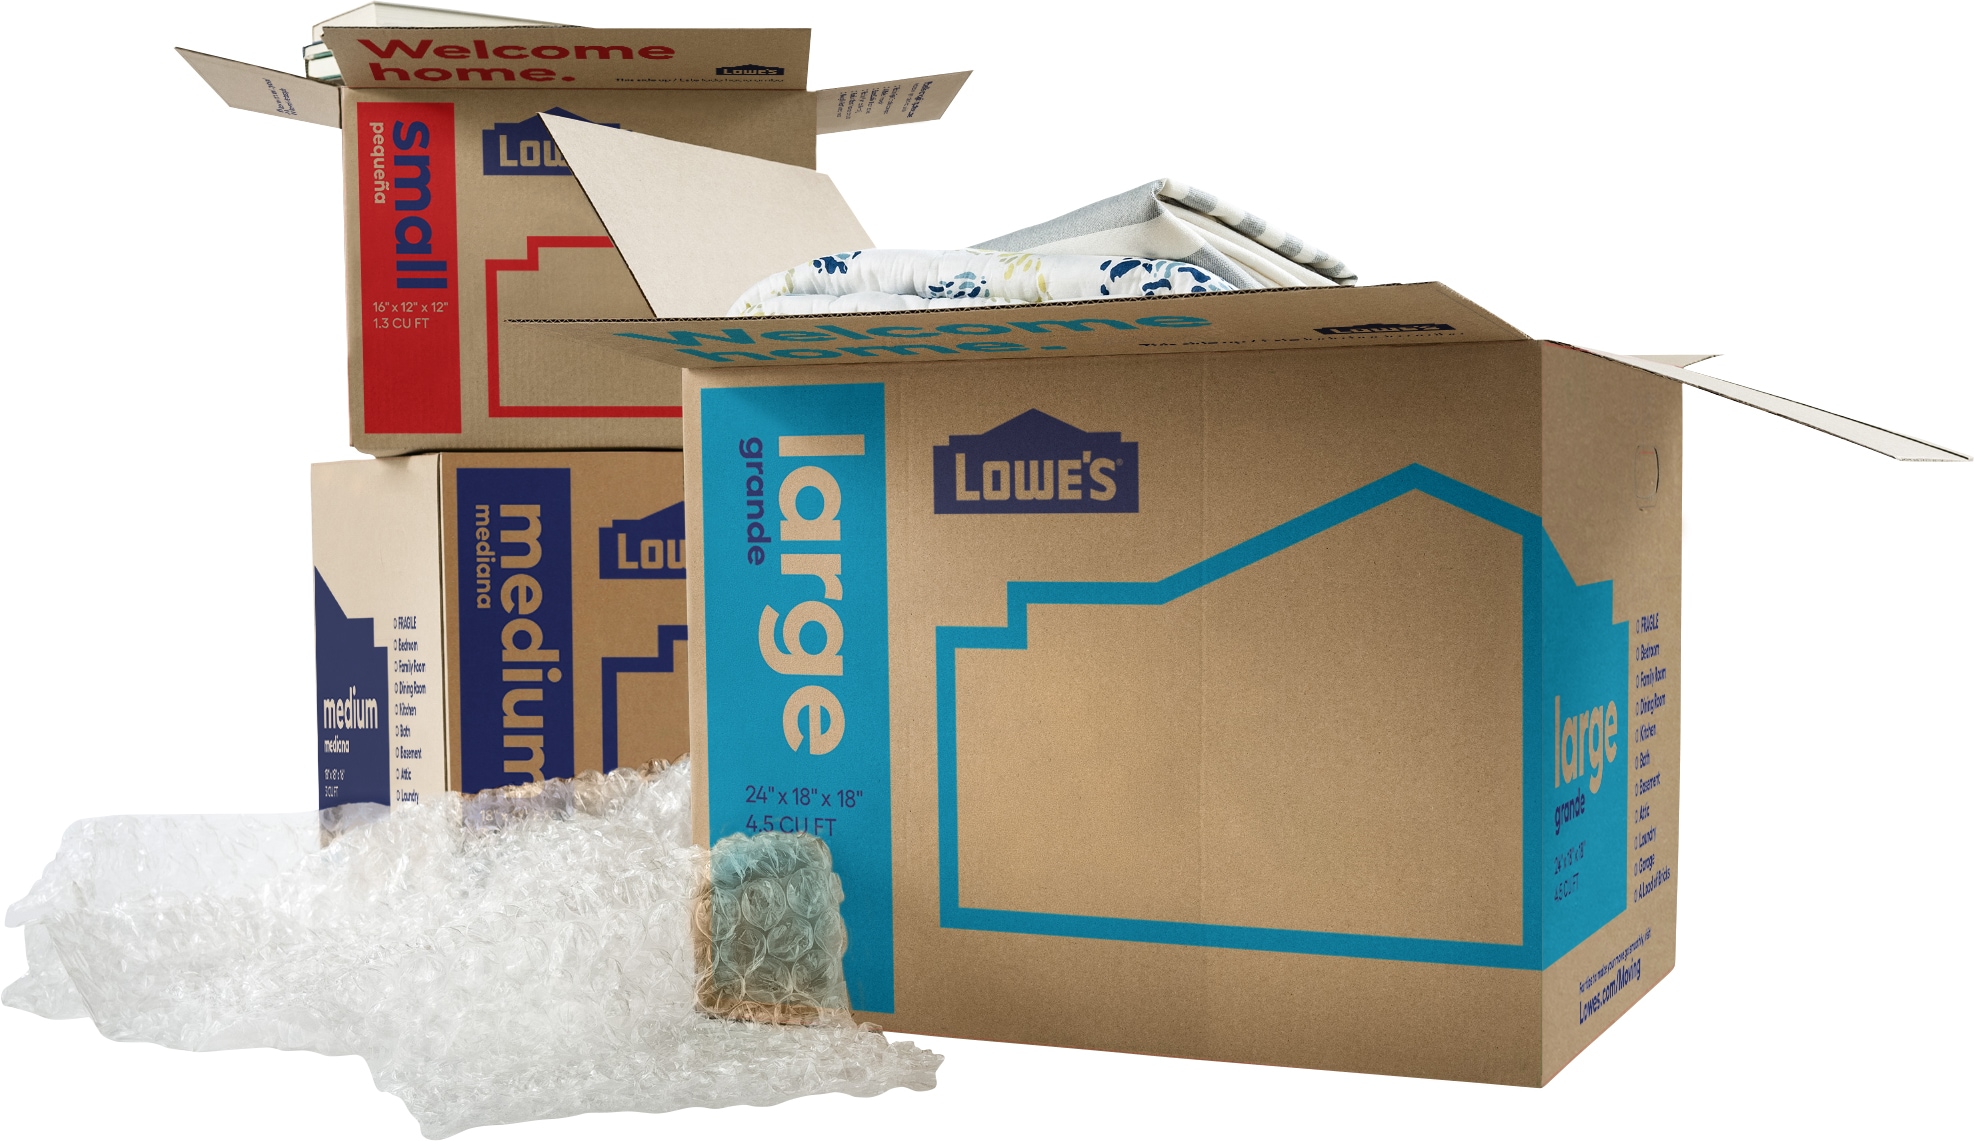 Lowe's 1211258 Moving Box Classic Large Cardboard Moving Boxes with Handle Holes - 24 W x 18 H x 18 D - Each